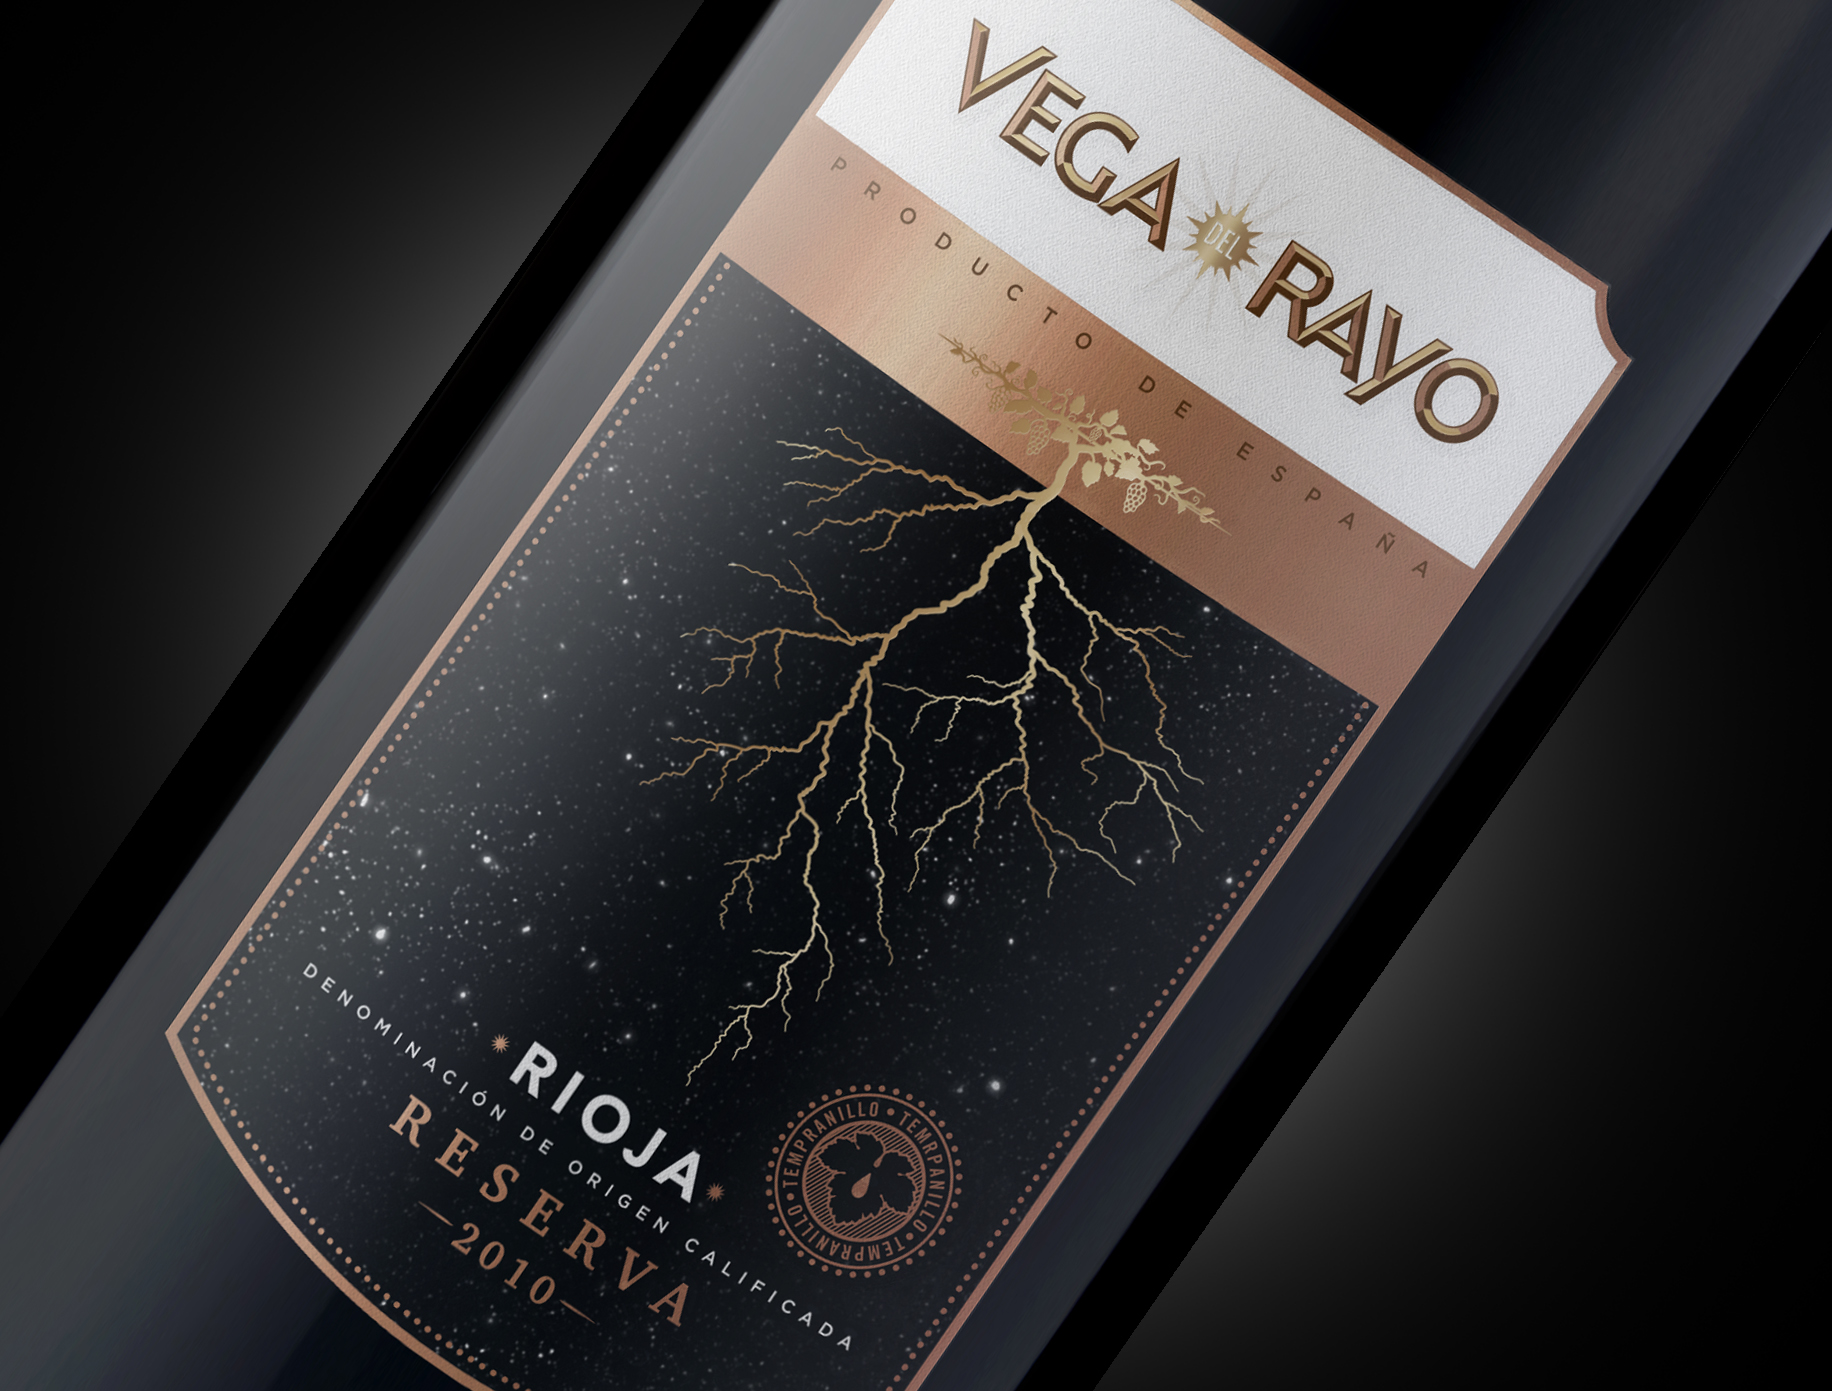 New Brand Story, Brand Identity and Packaging Design for a Trio of Riojas Wines